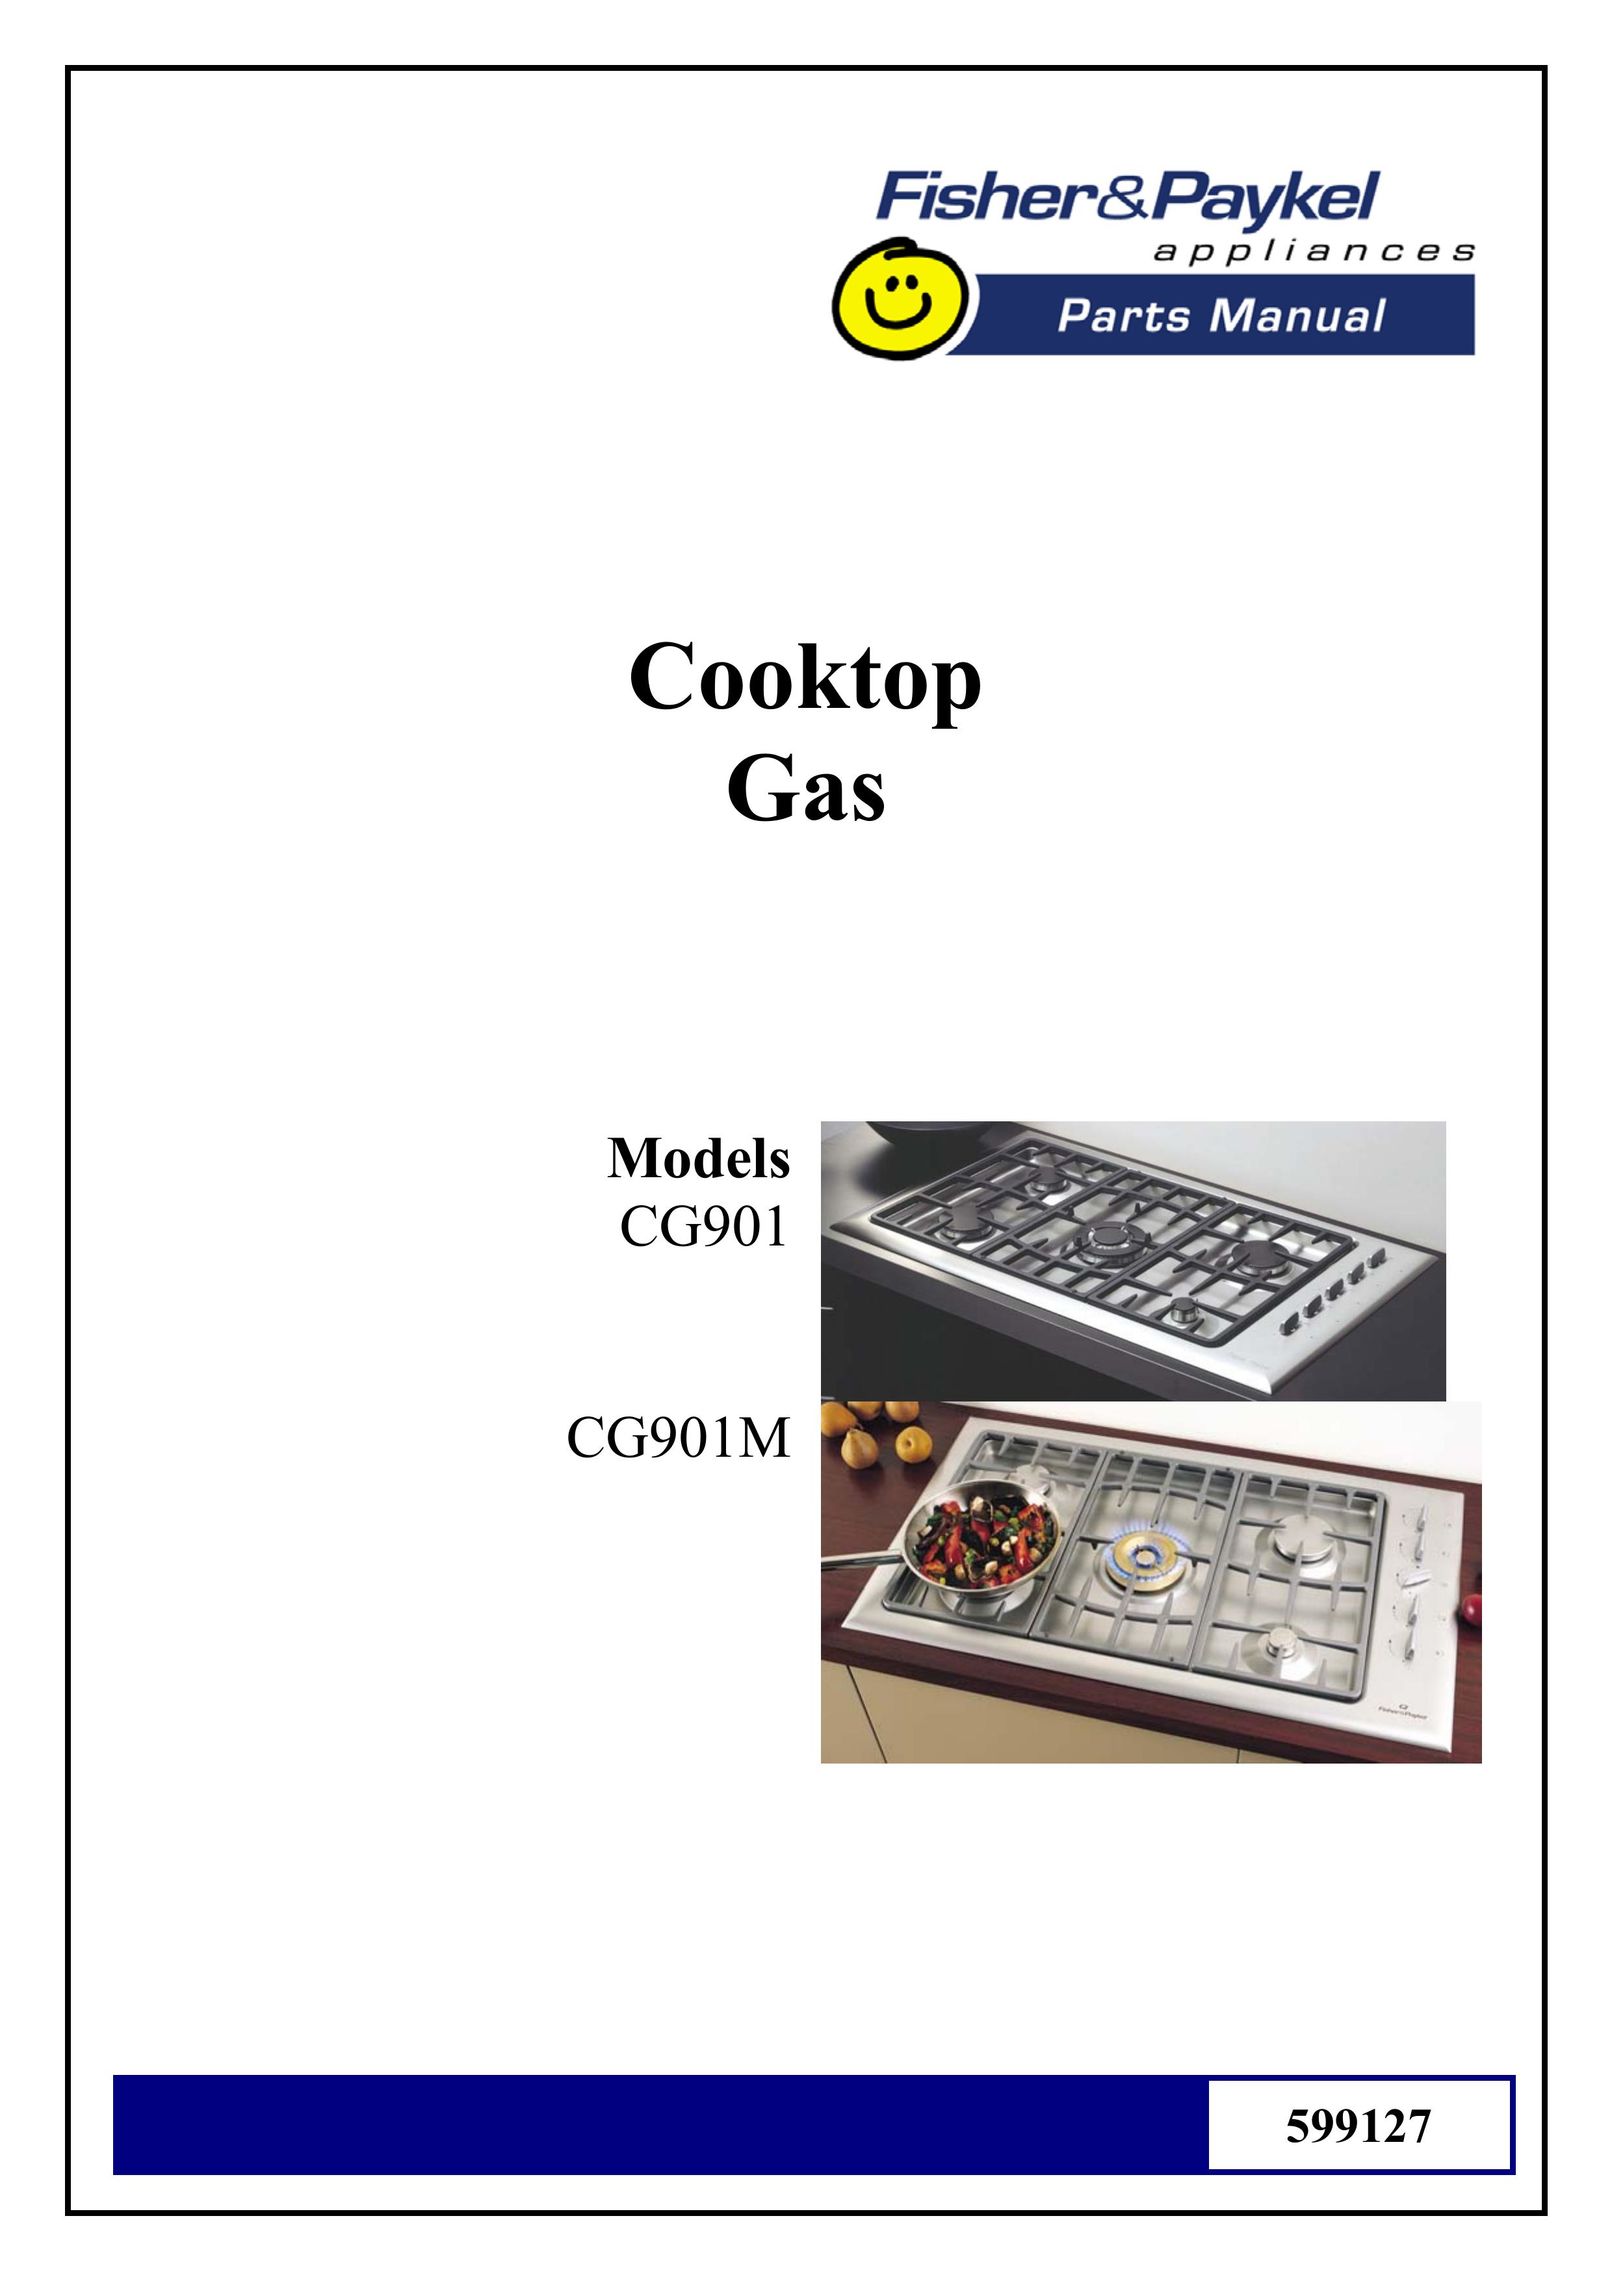 Fisher & Paykel 599127 Cooktop User Manual